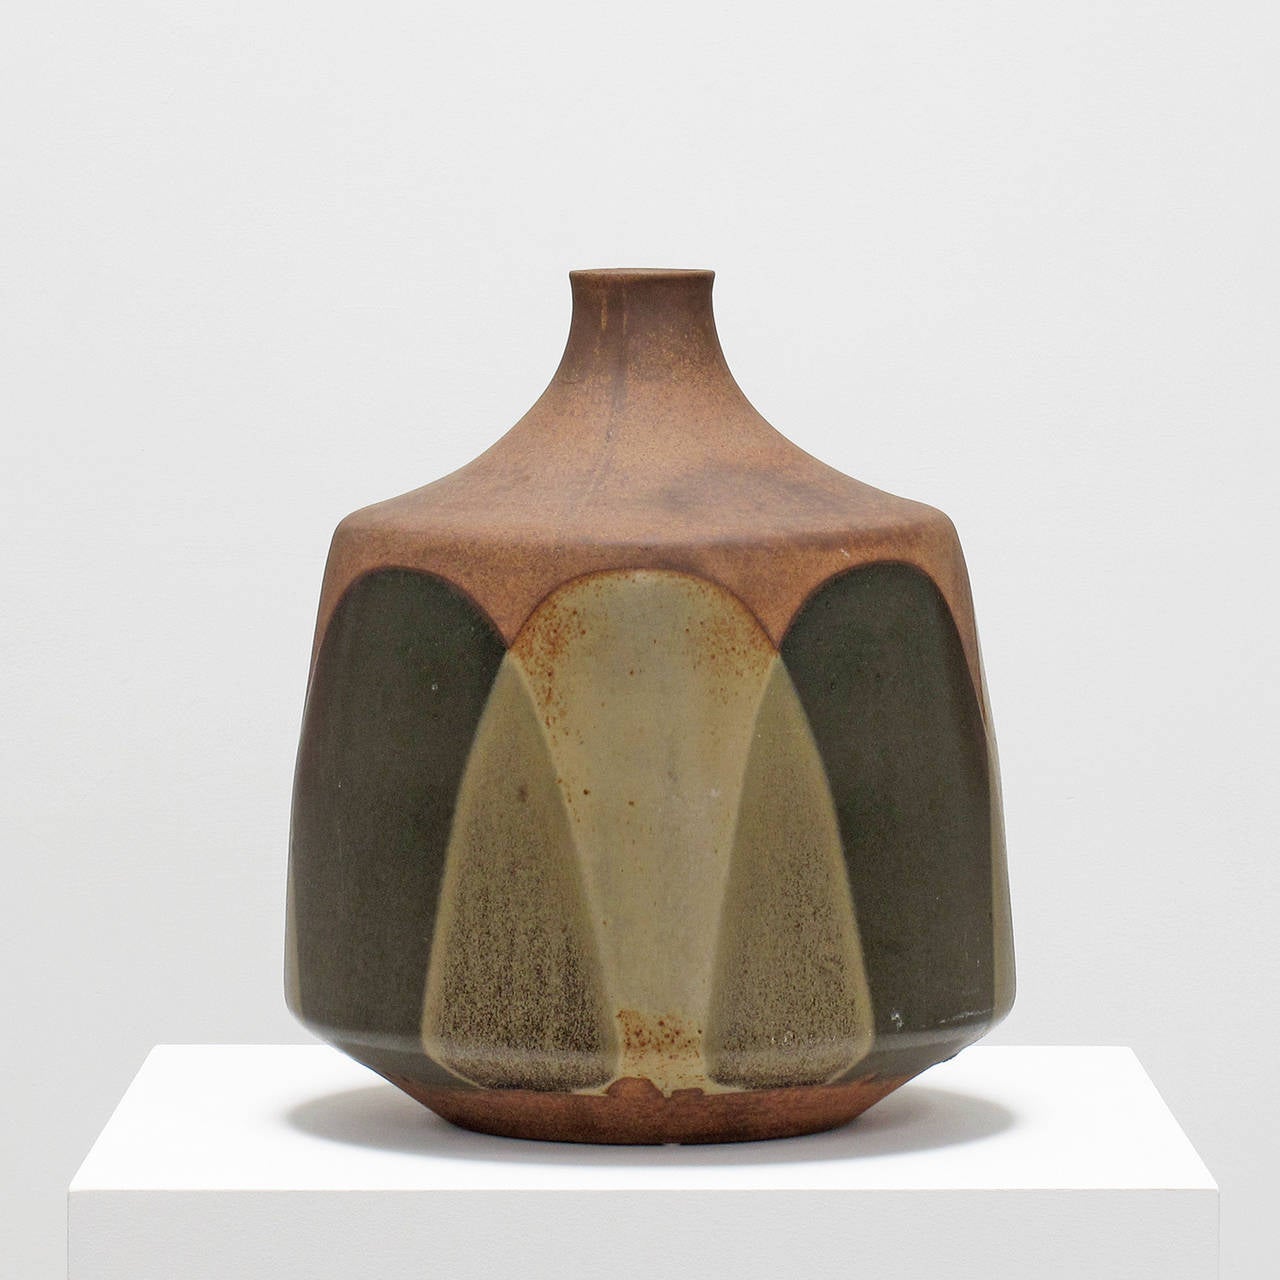 David Cressey
'Flame' glaze design ceramic lamp base, 1960s
Stoneware, glazed dark olive and golden ochre
Pro Artisan Collection
Architectural Pottery
Los Angeles, California

Measurements in inches: 16 high x 12 diameter

The original wood